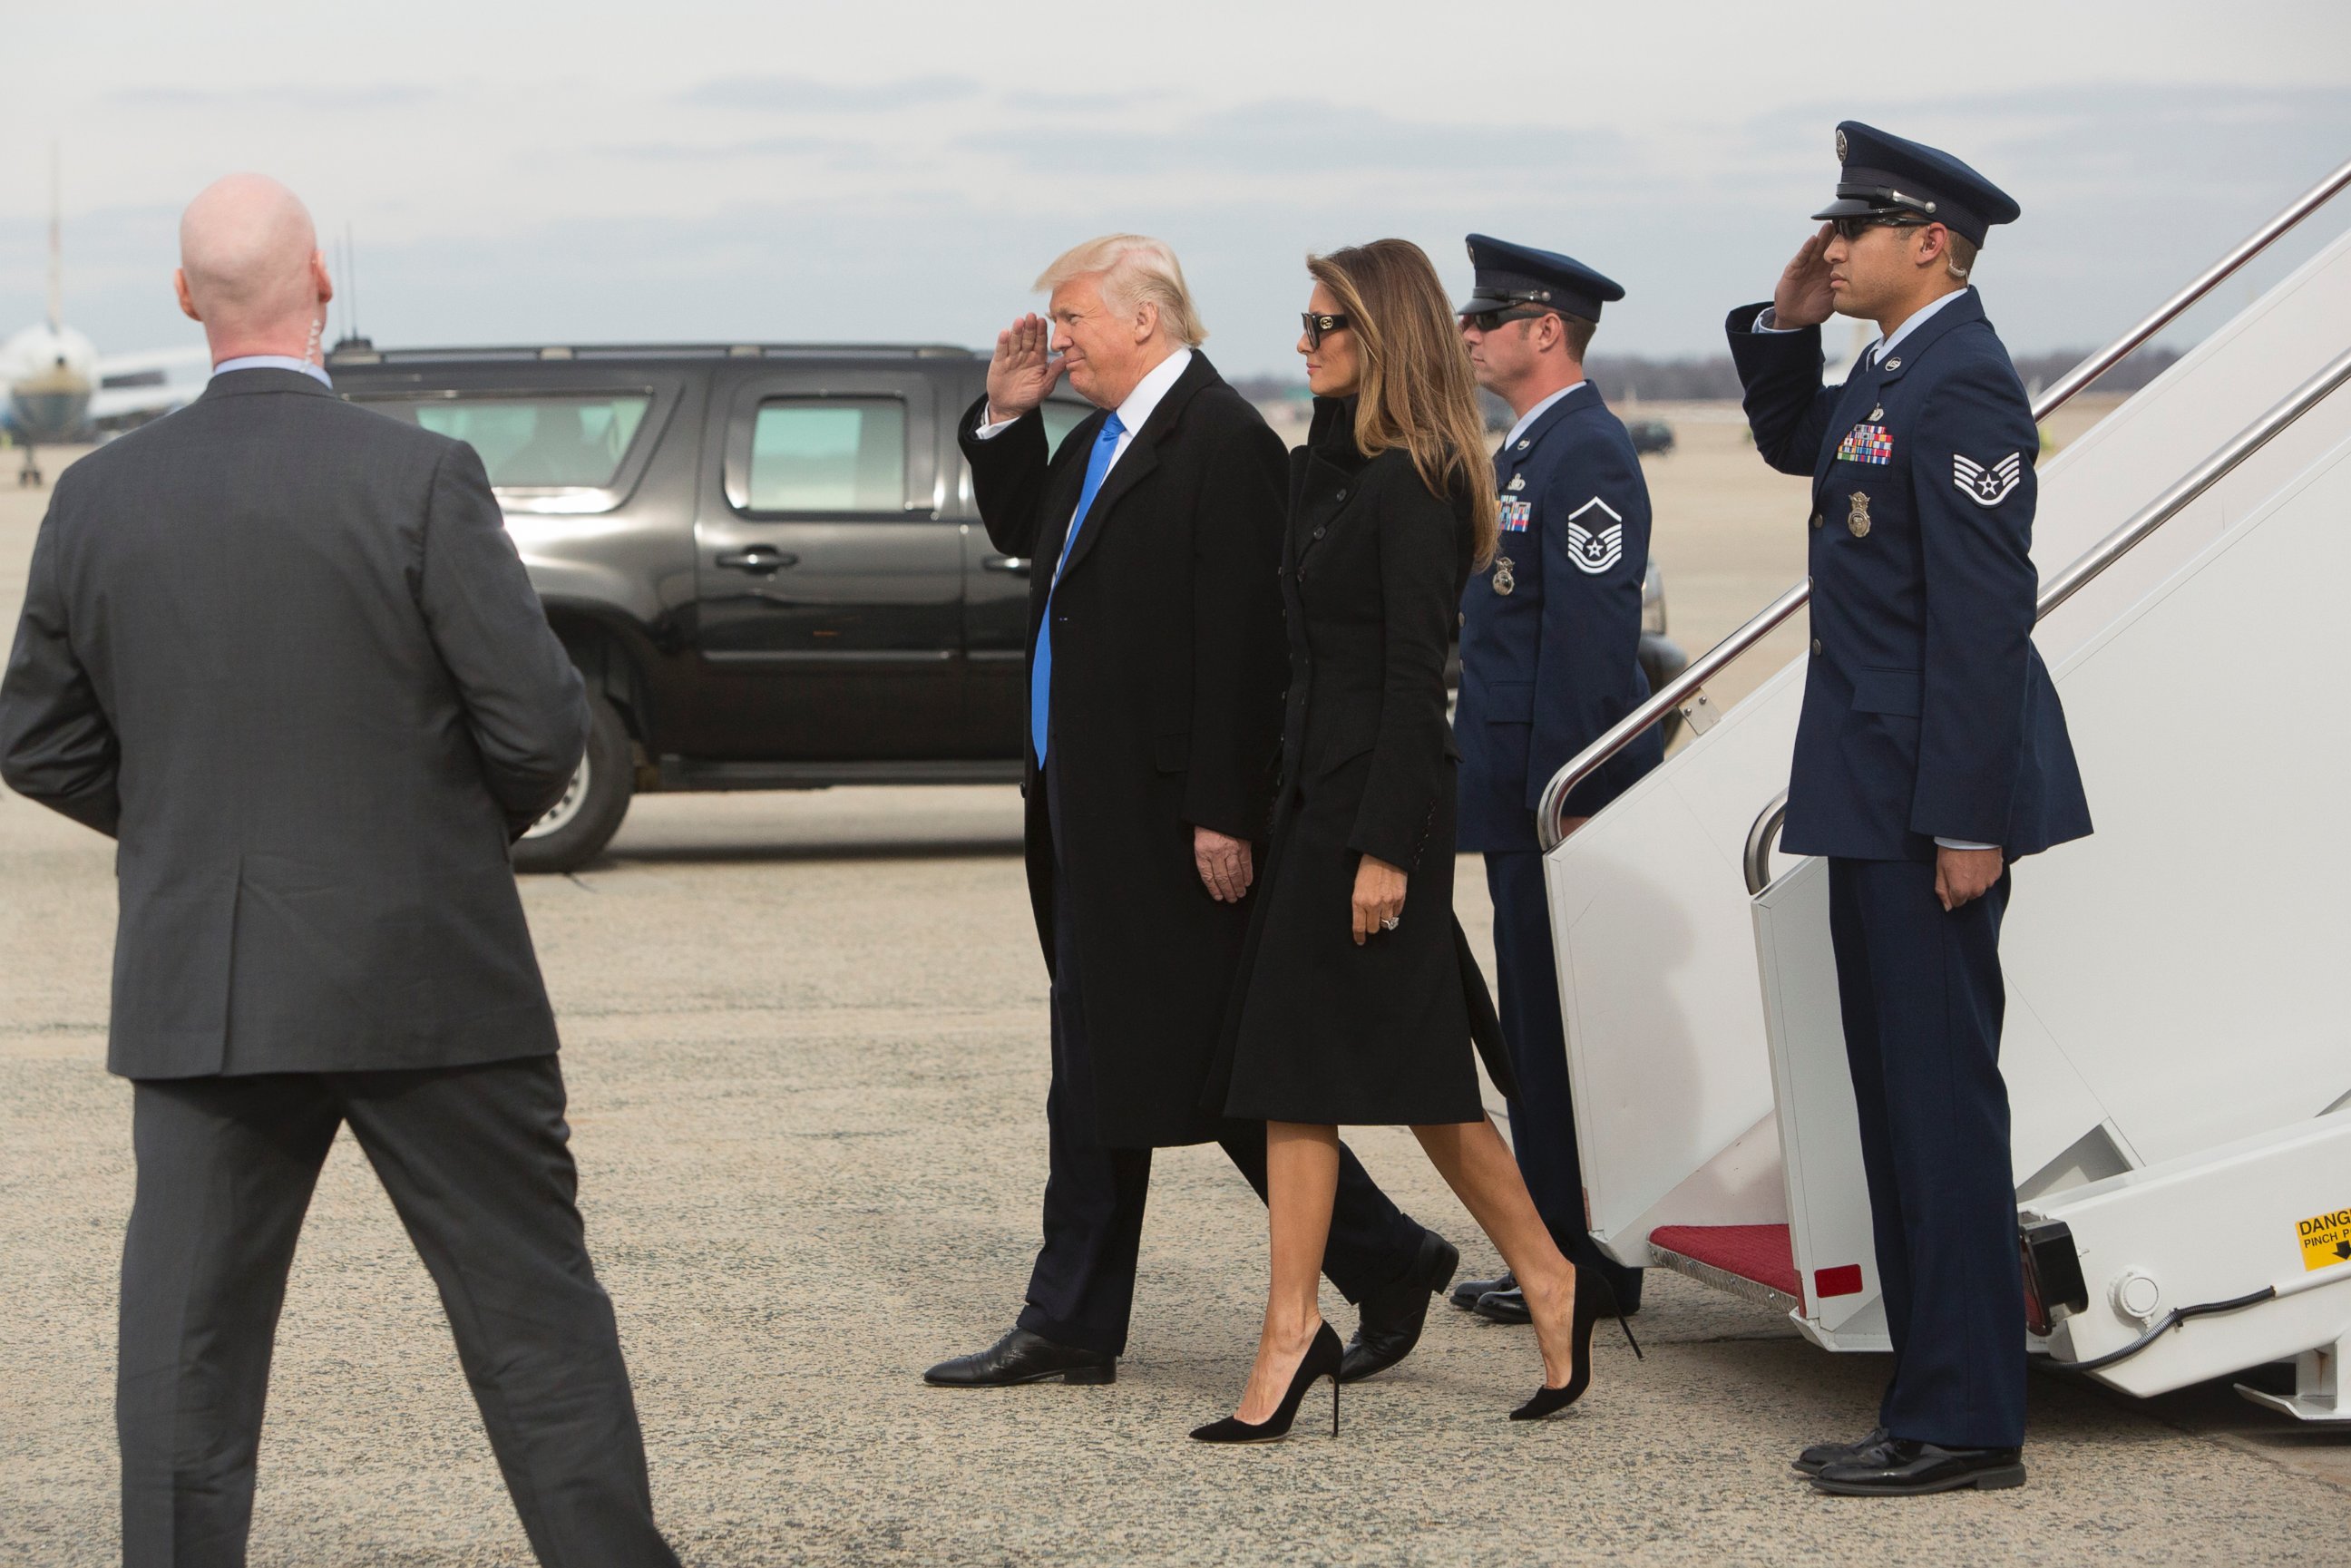 PHOTO: President-elect Donald J. Trump salutes the Air Force stewards, as he and his wife Melania arrive in the Washington, DC area on a US Air Force plane the day before his swearing-in as the 45th President of The United States. 